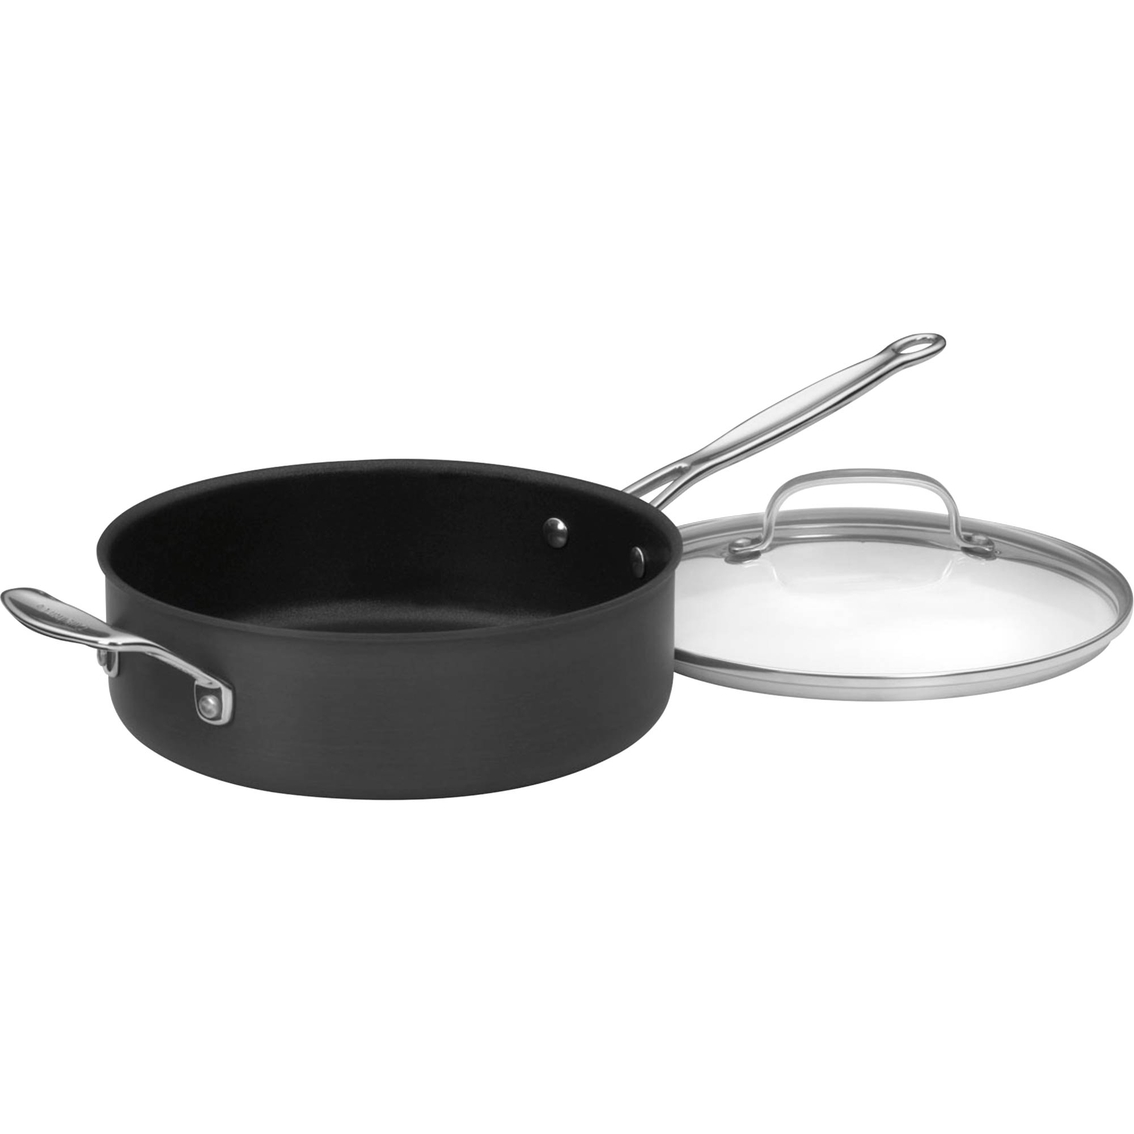 Cuisinart Chef's Classic Nonstick Hard Anodized 5.5 qt. Covered Saute Pan